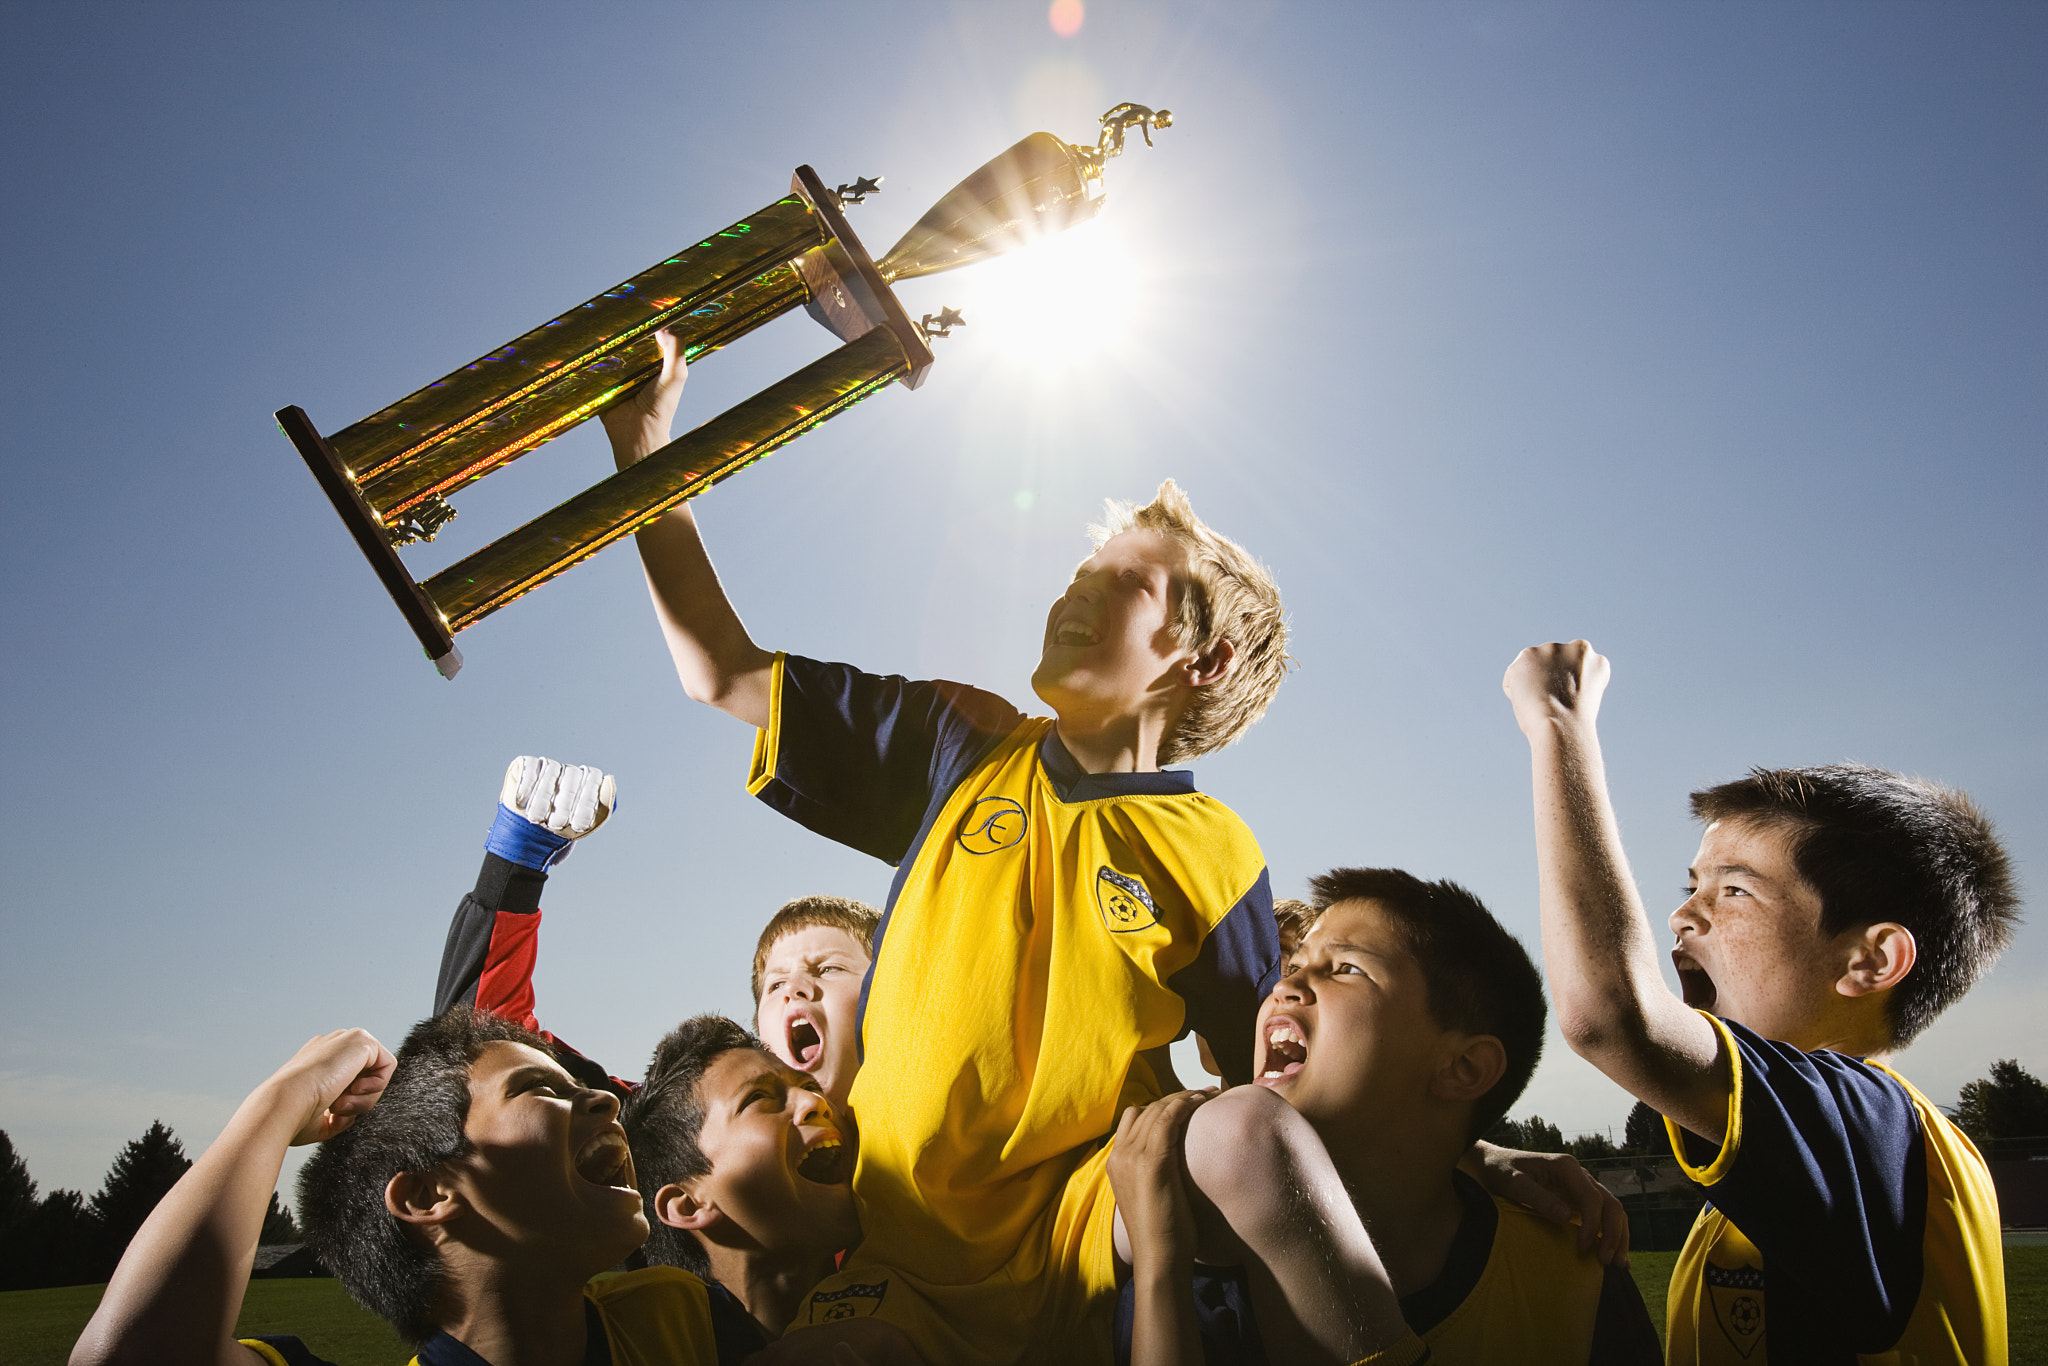 A group of boys in soccer team shirts holding a trophy and celebrating a win.